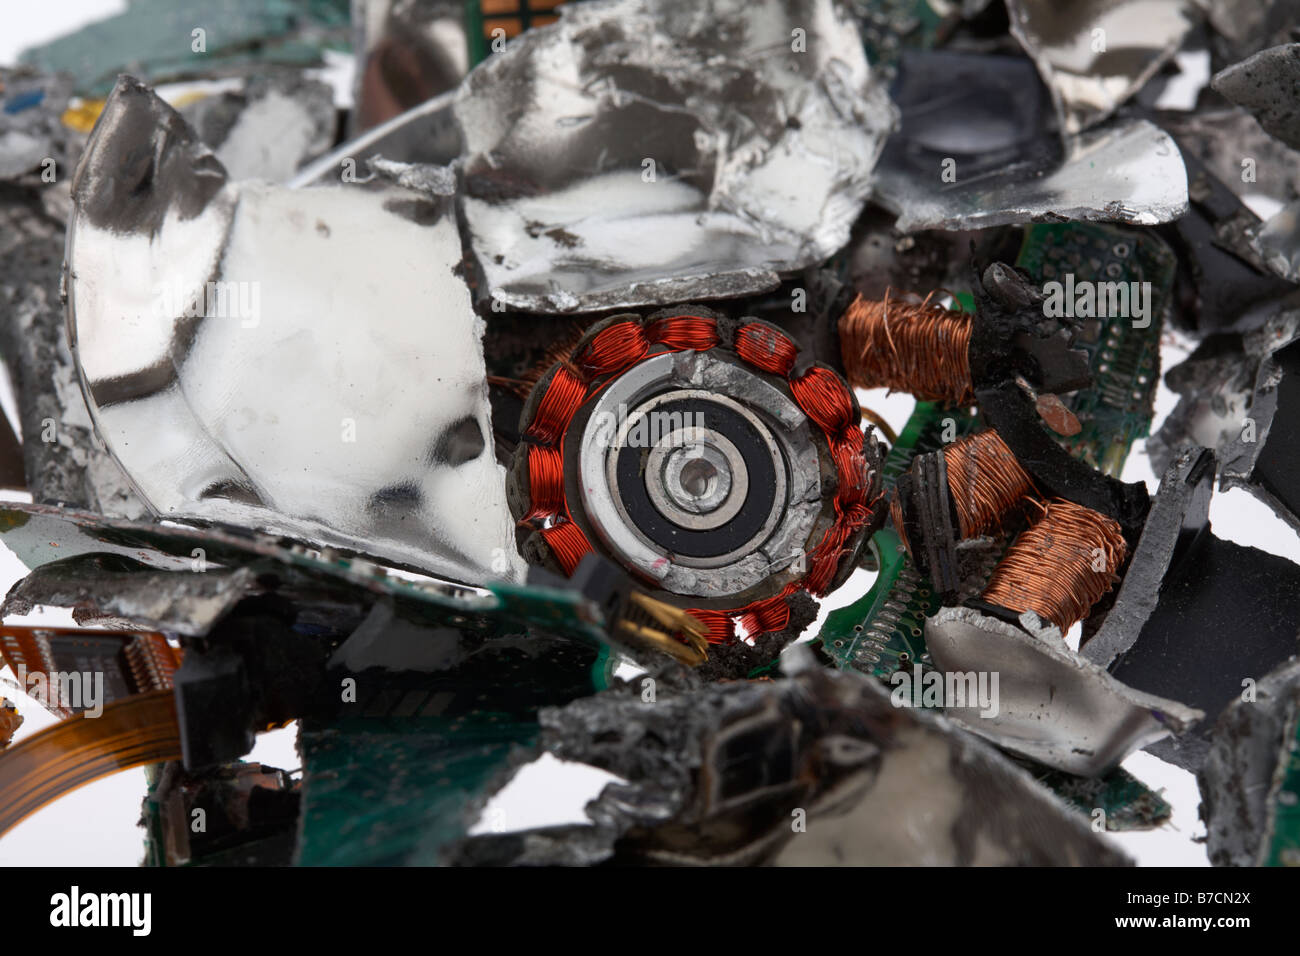 pile of shredded computer hard drive material Stock Photo